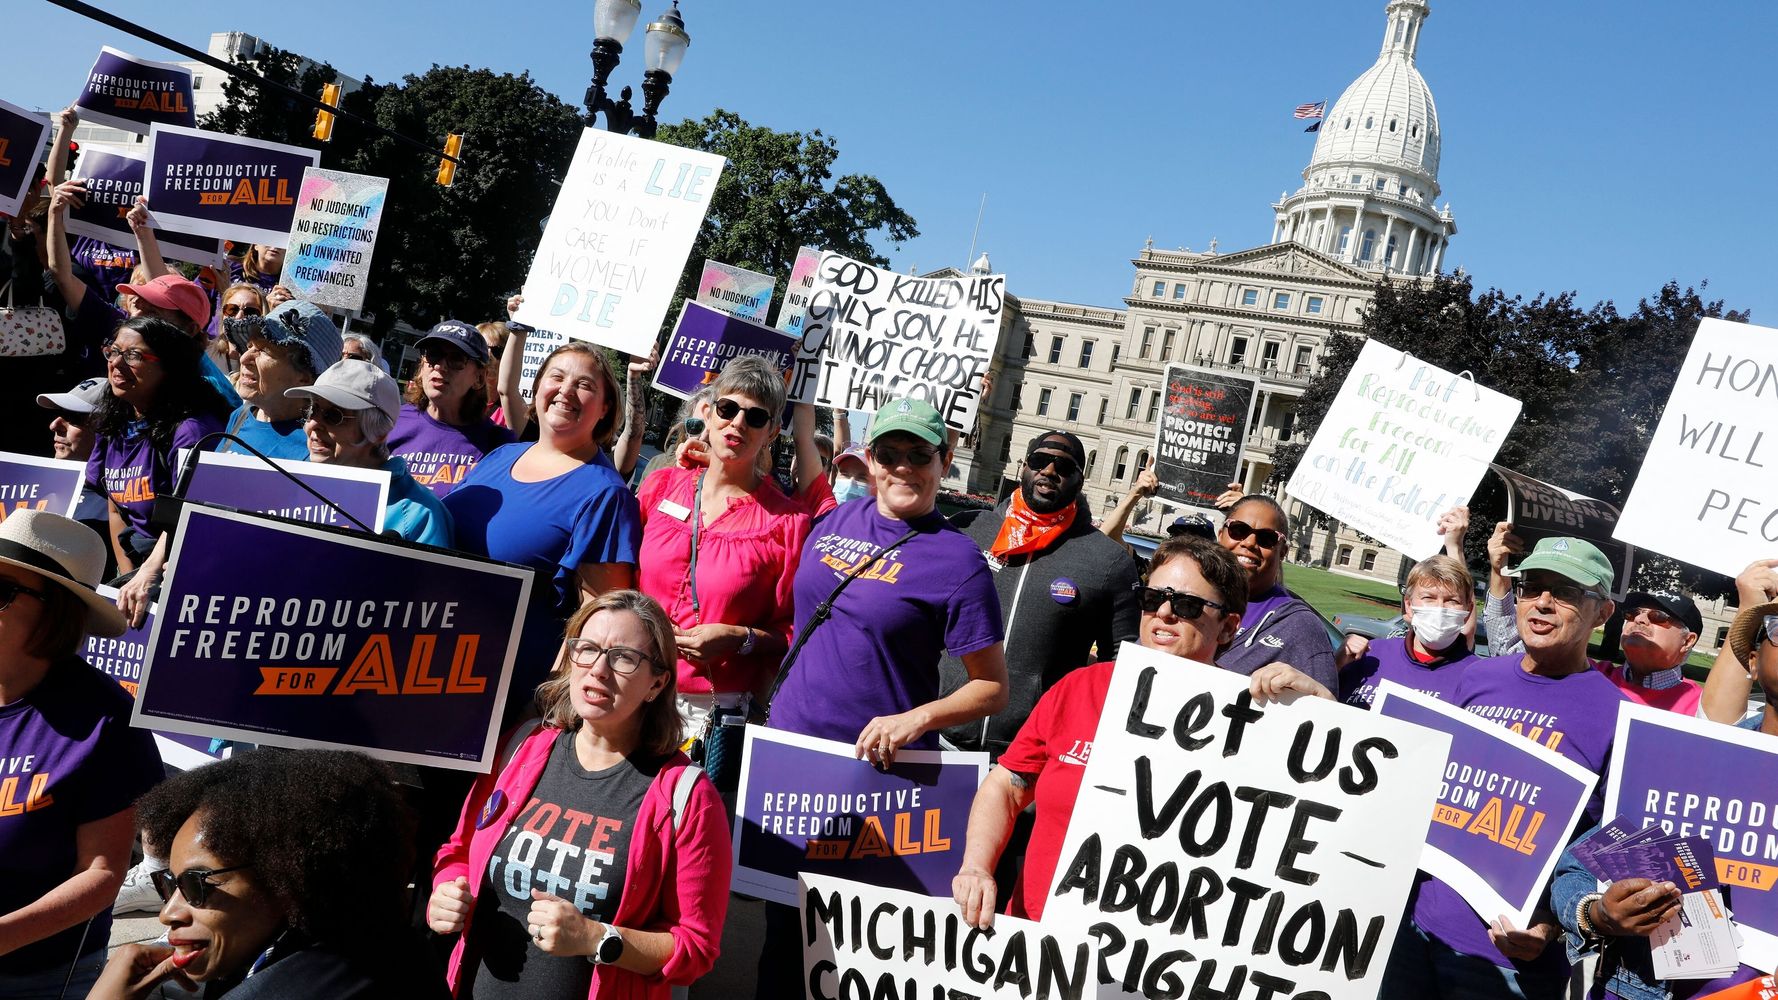 A group of protesters is standing in front of a white government building wearing purple shirts that say "reproductive freedom" in white text and "for all" in orange text. A protester in the front right holds a sign that says "Let us VOTE abortion rights," and many of the protesters are holding purple signs that also say "reproductive freedom" in white text and "for all" in orange text.